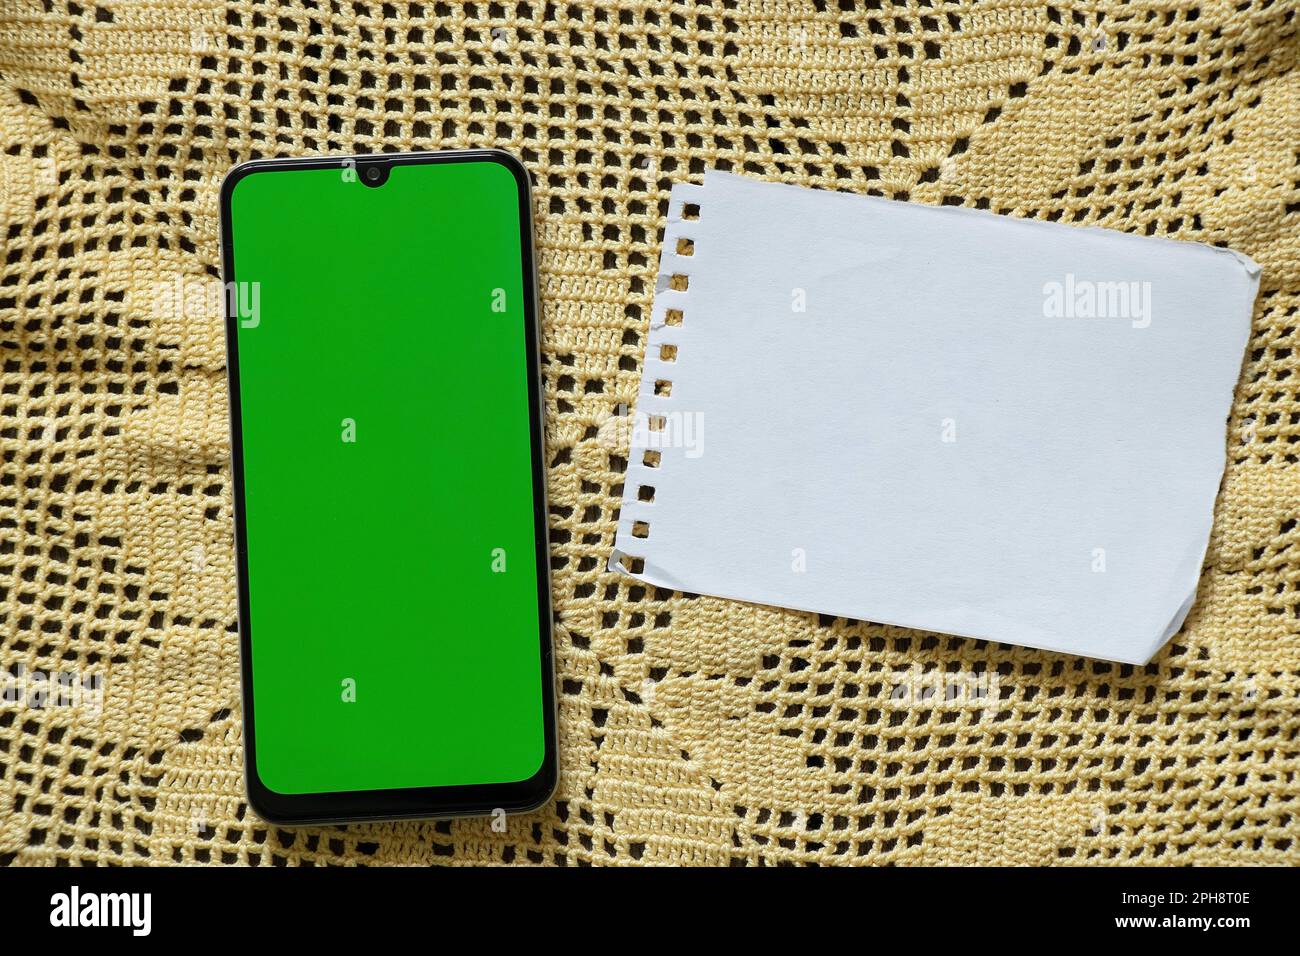 the phone with a green screen lies on a yellow lace napkin and next to a blank blank sheet of white paper on the table Stock Photo